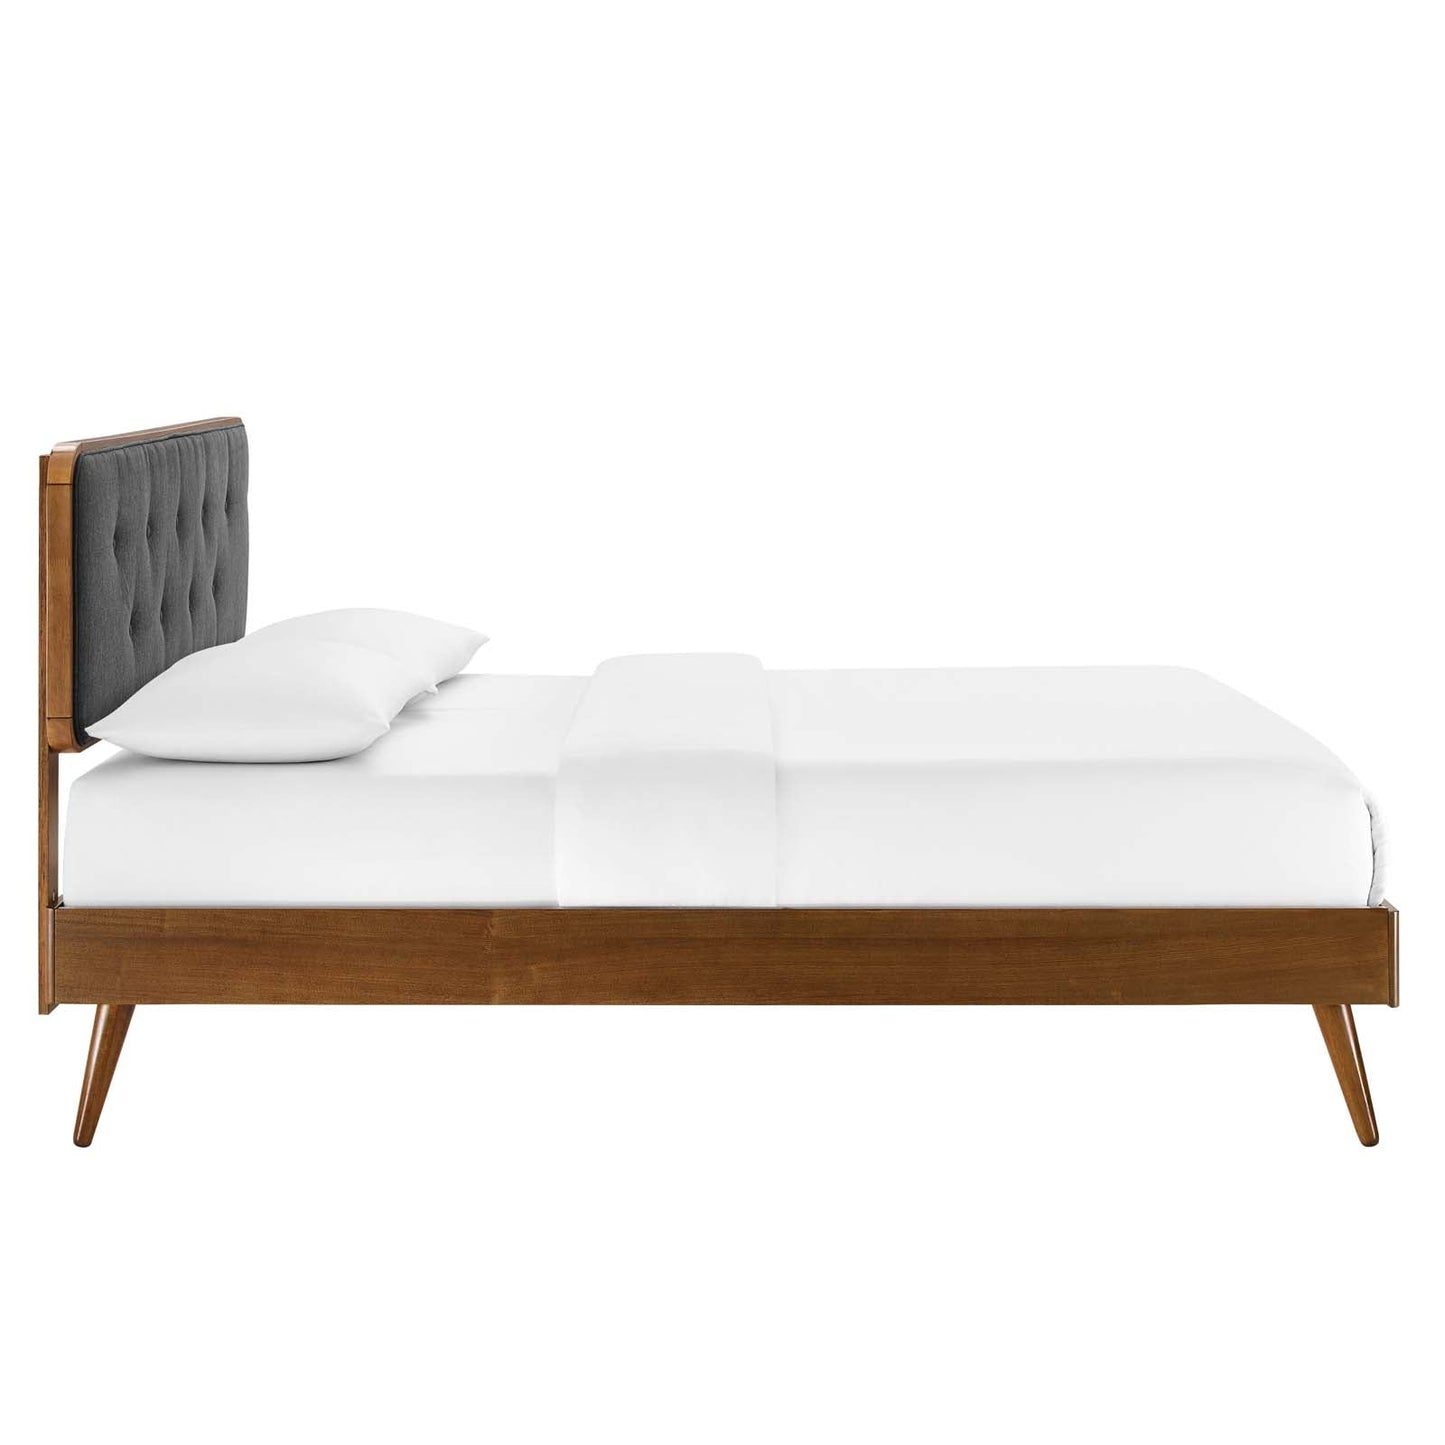 Adelina Wood King Platform Bed With Splayed Legs